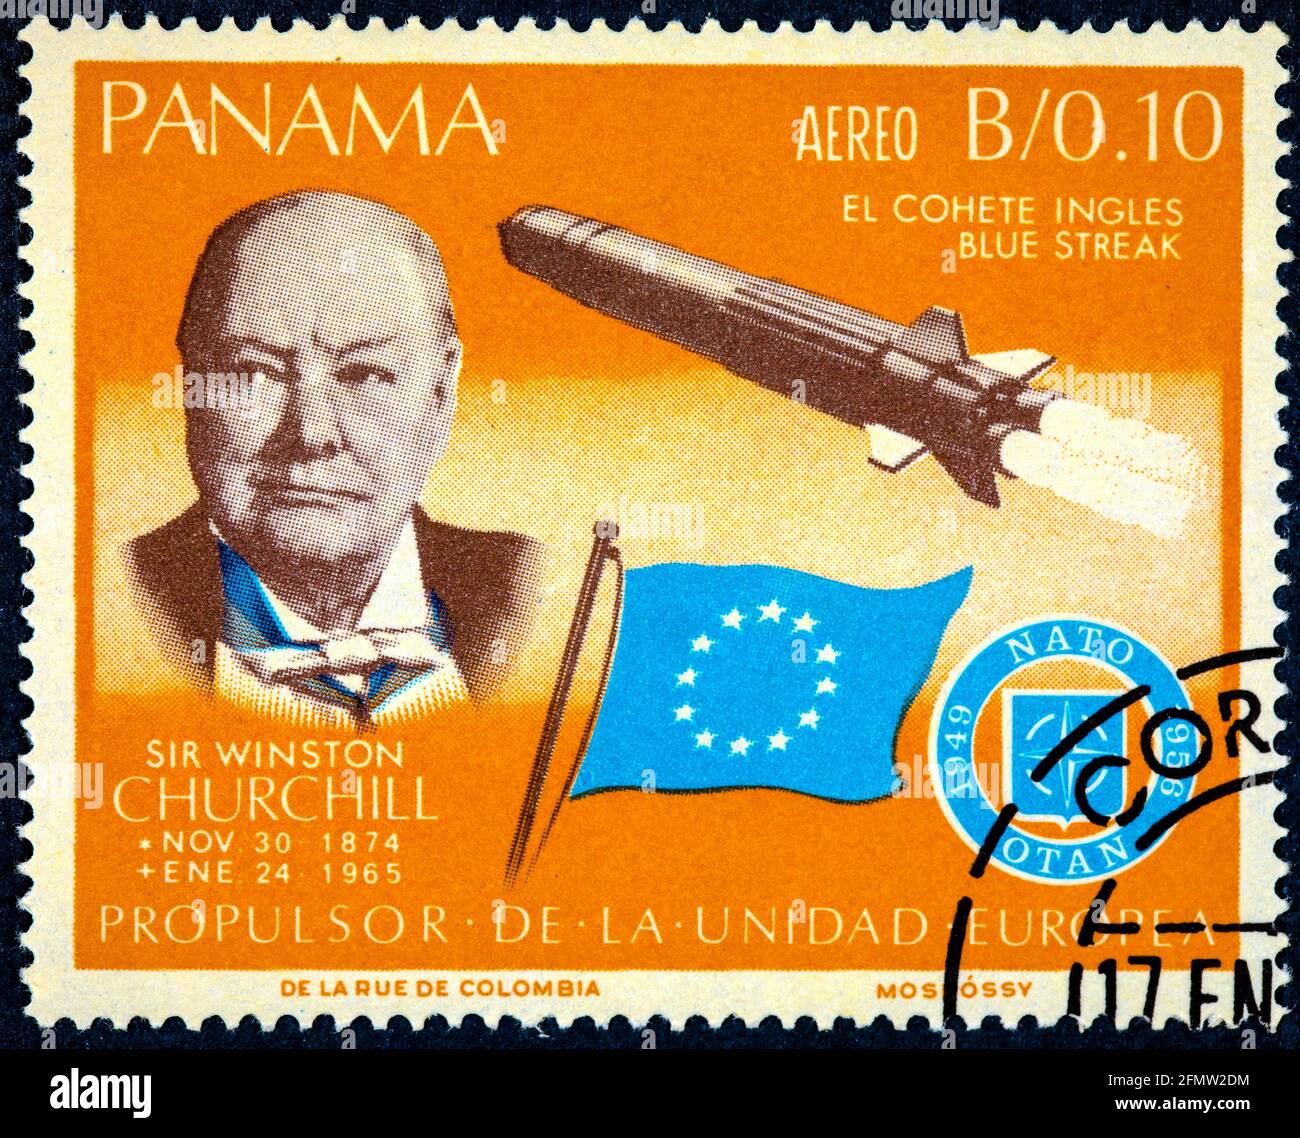 Save Download Preview PANAMA - CIRCA 1966: A stamp printed by Panama shows Sir Winston Churchill and rocket Blue streak Stock Photo